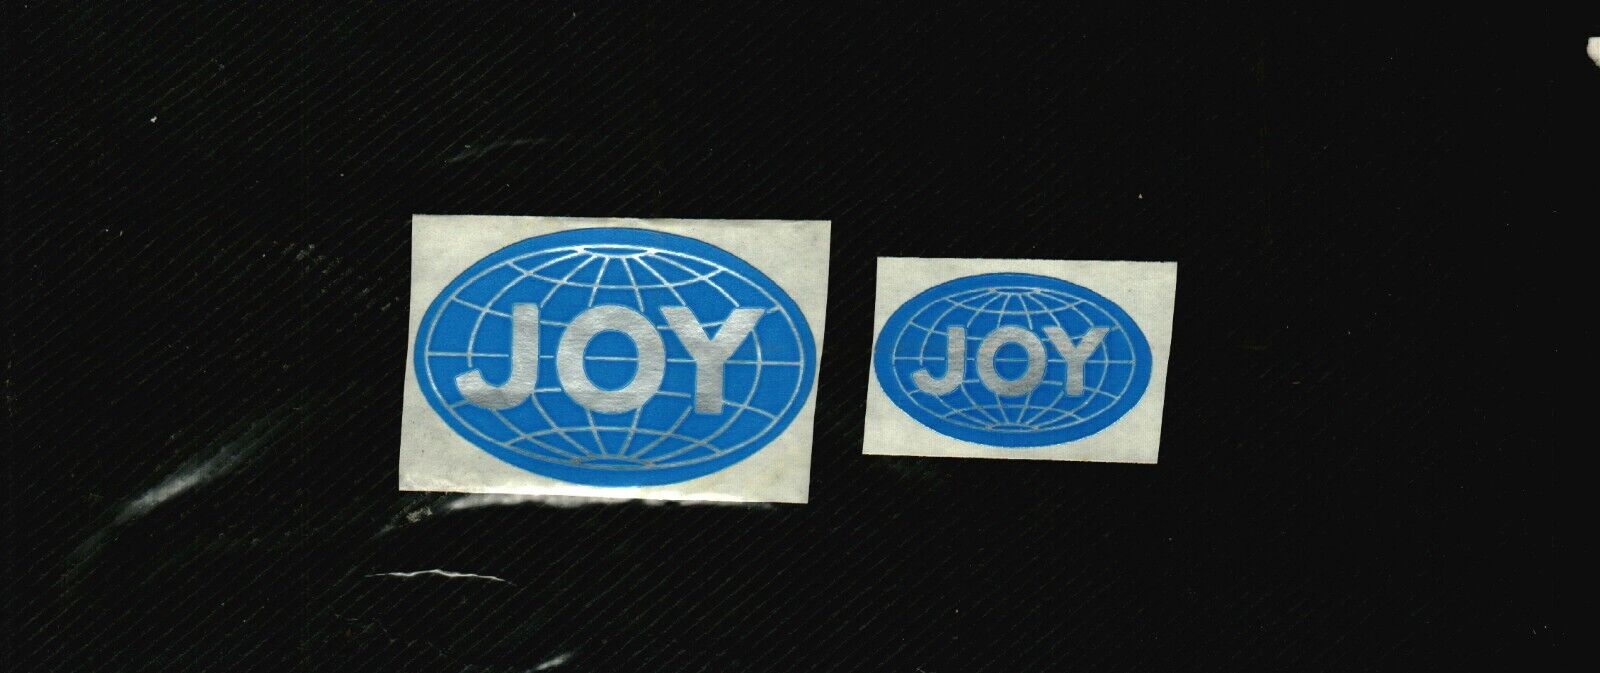 LOT OF 2 SMALLER THAN NORMAL SIZE BLUE JOY GLOBES COAL MINING STICKES # 567